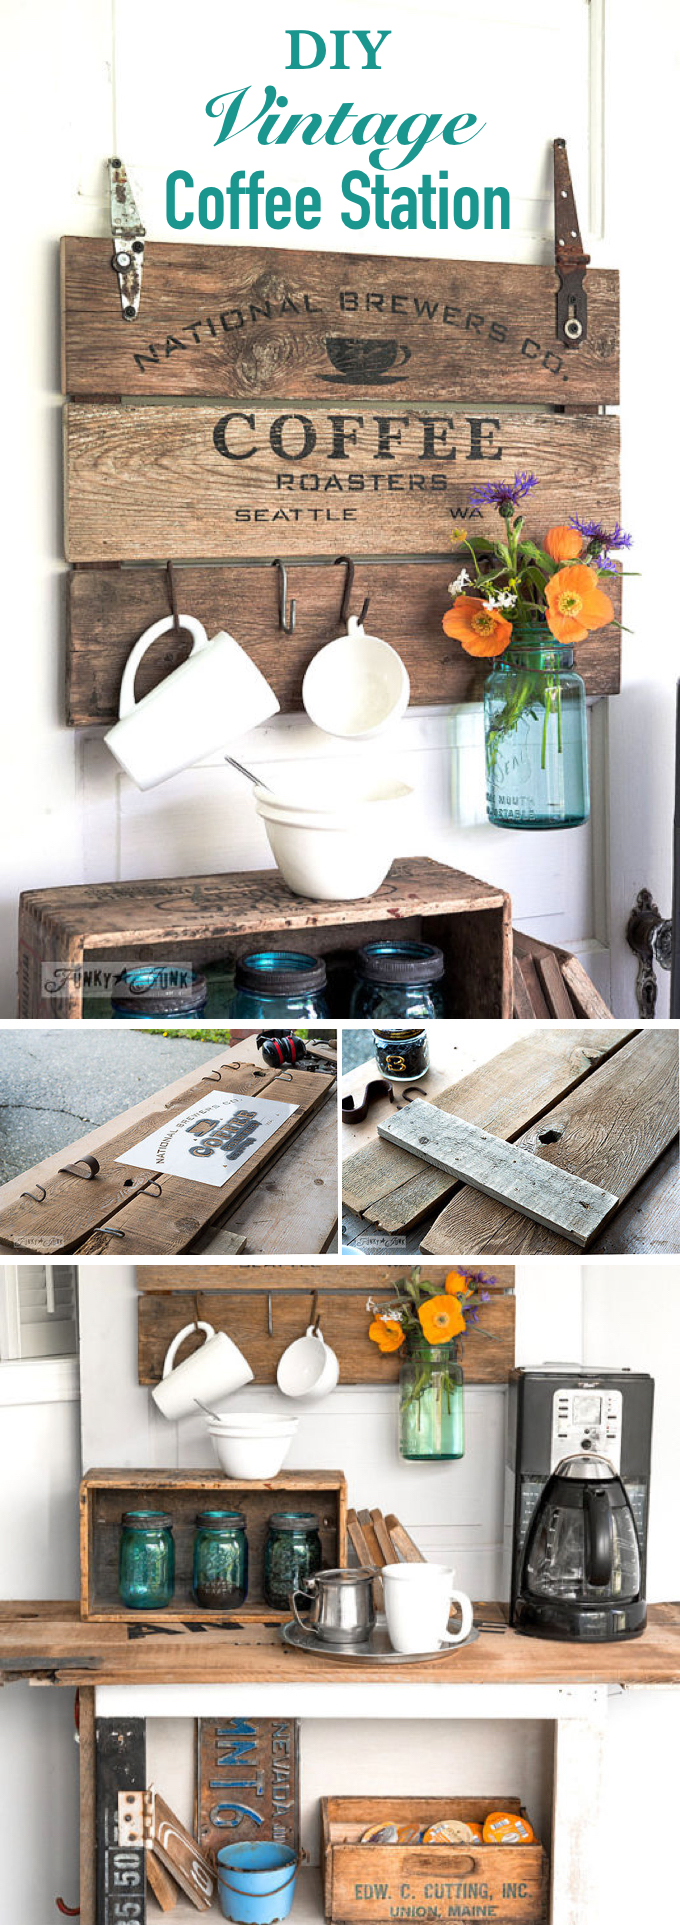 30 Charming Diy Coffee Station Ideas For All Coffee Lovers Homelovr